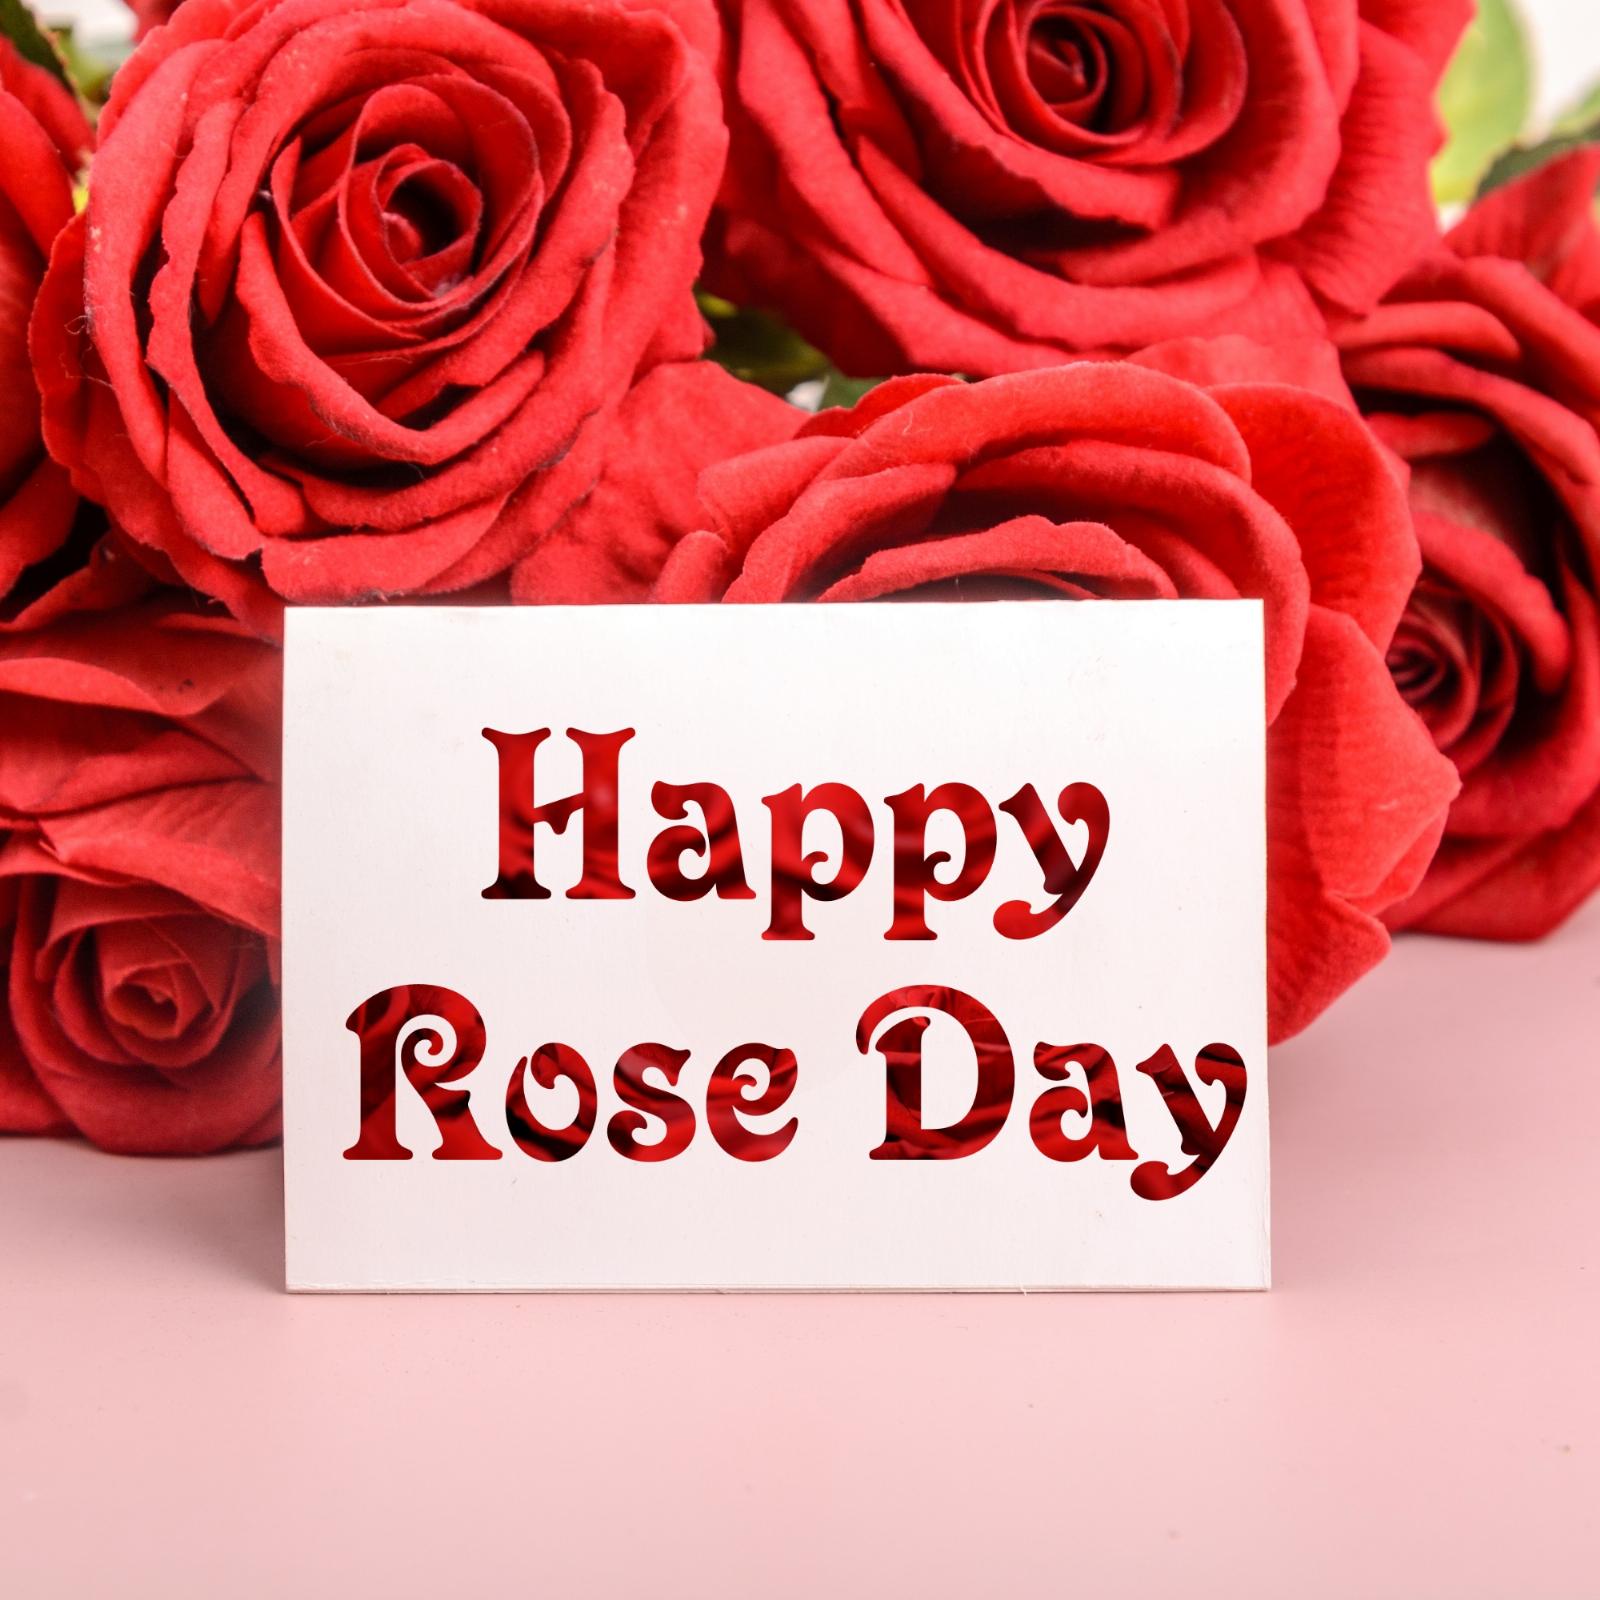 Cute Happy Rose Day Images